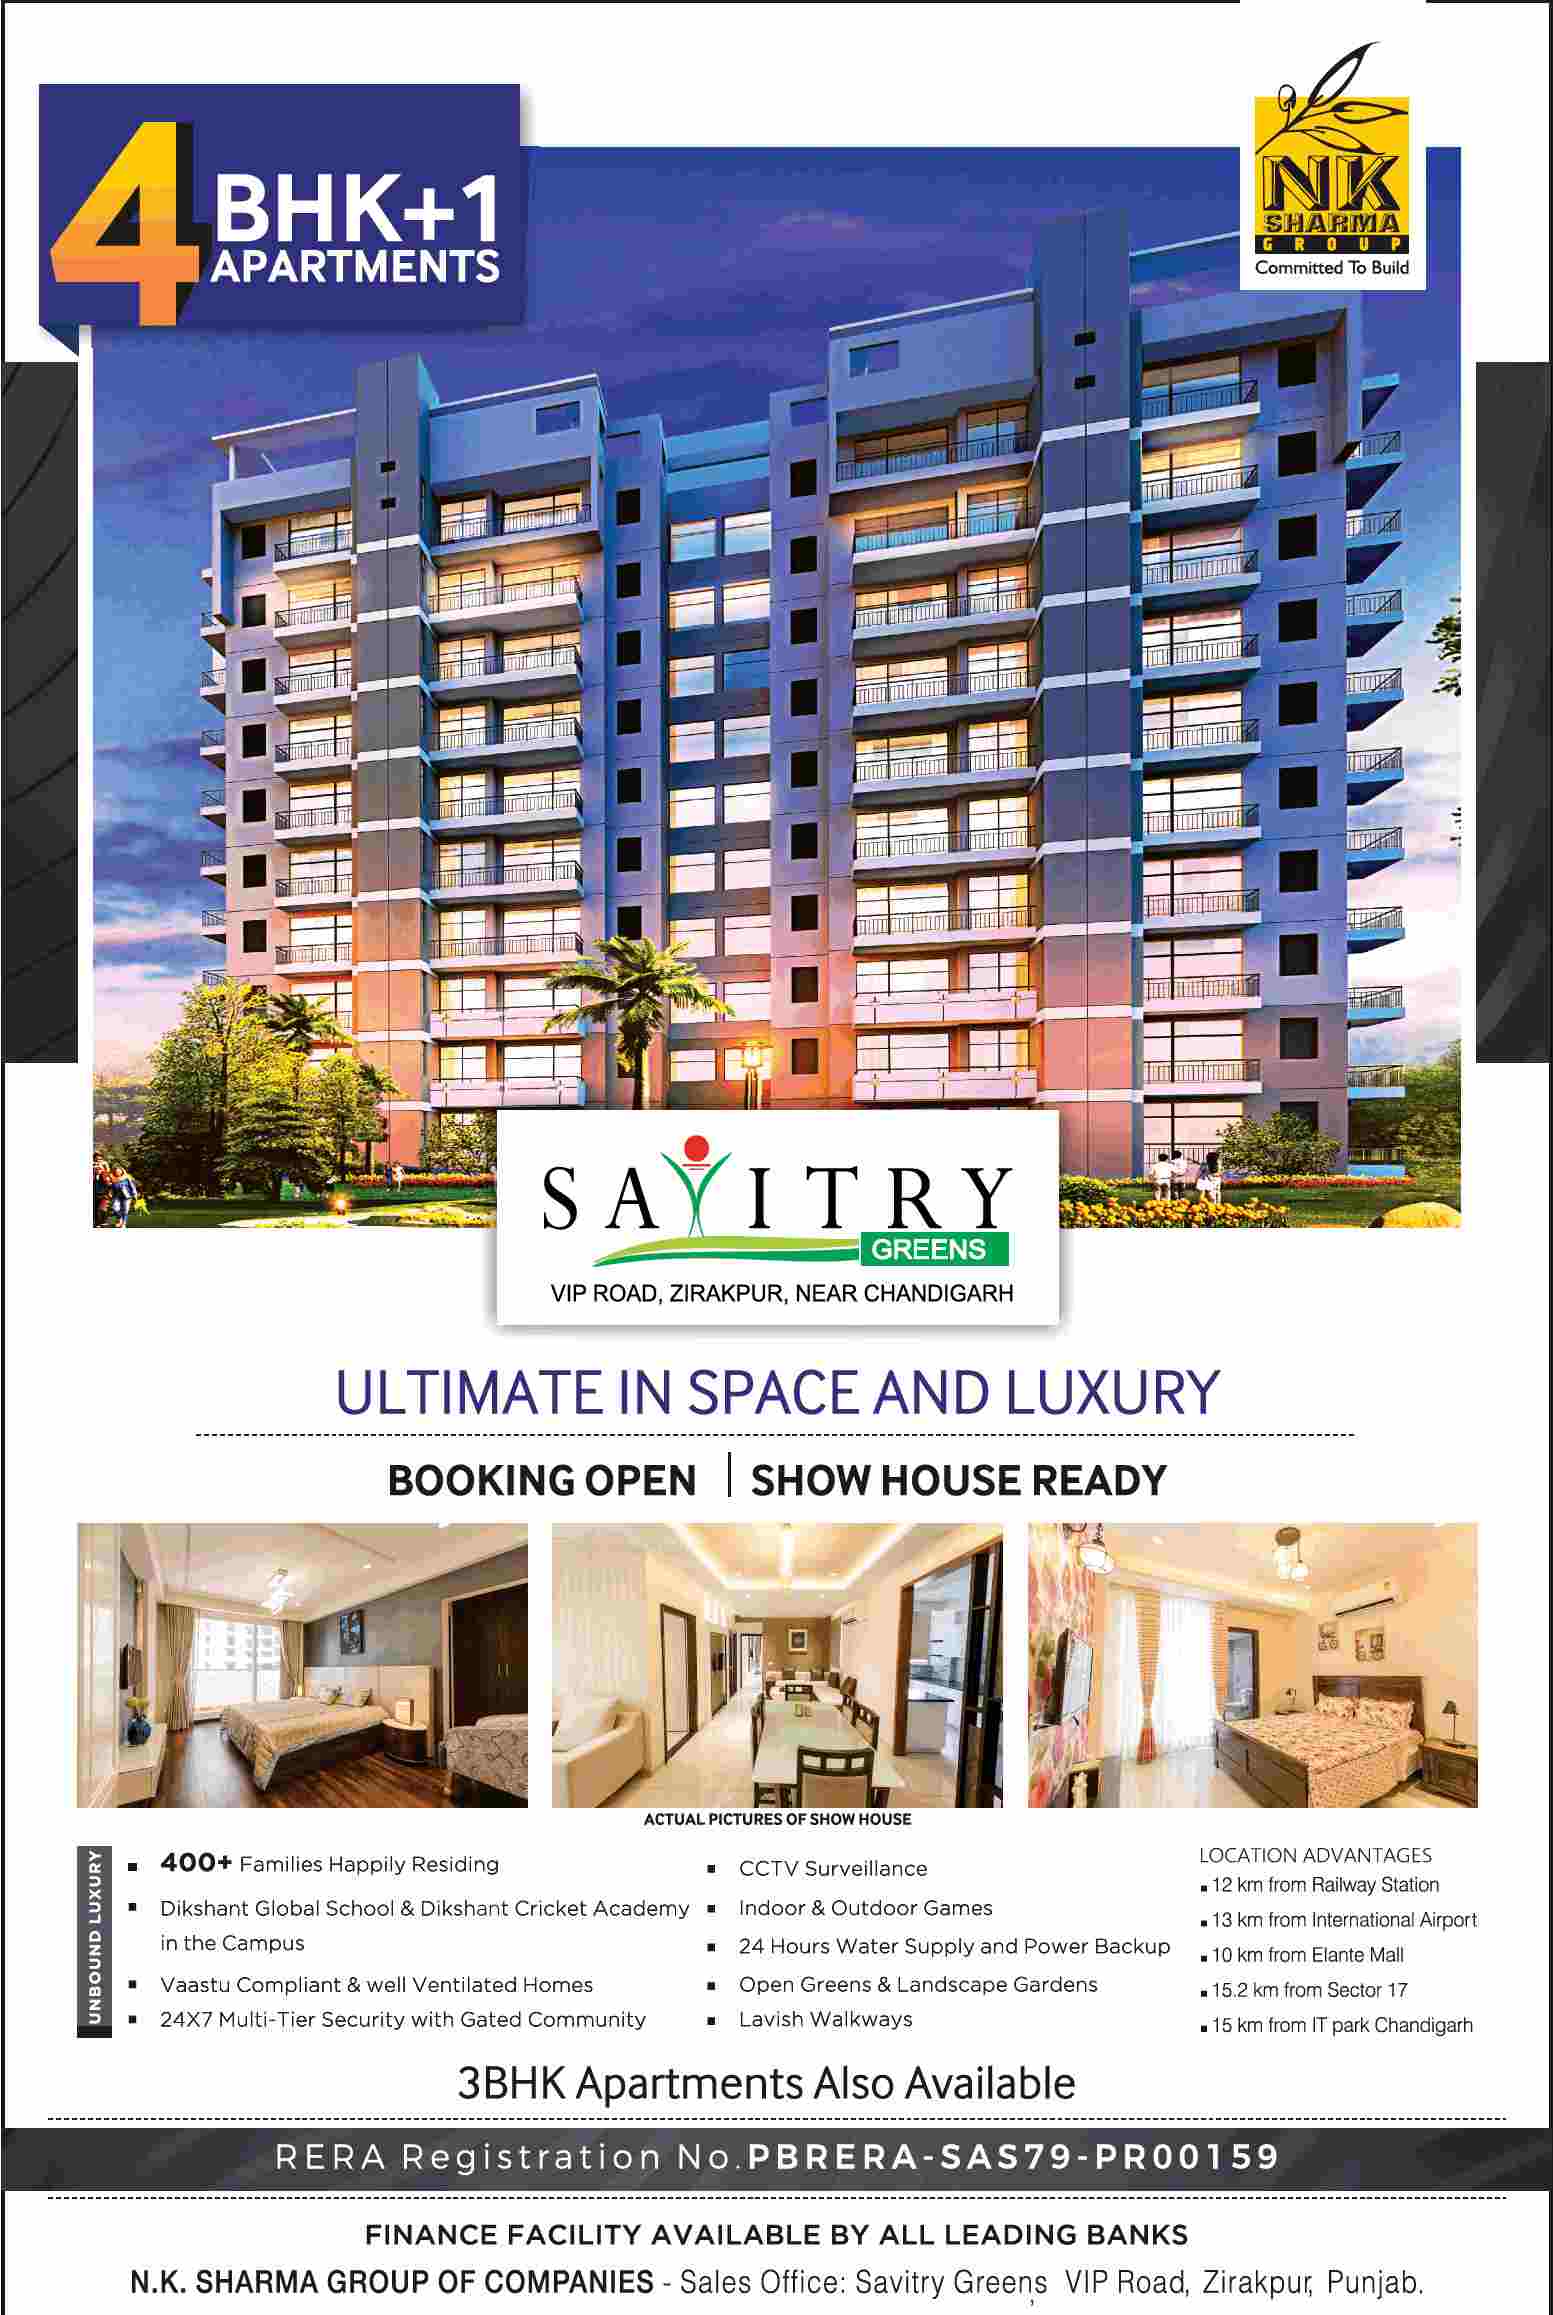 Invest in homes with ultimate space and luxury at NK Savitry Greens in Zirakpur Update